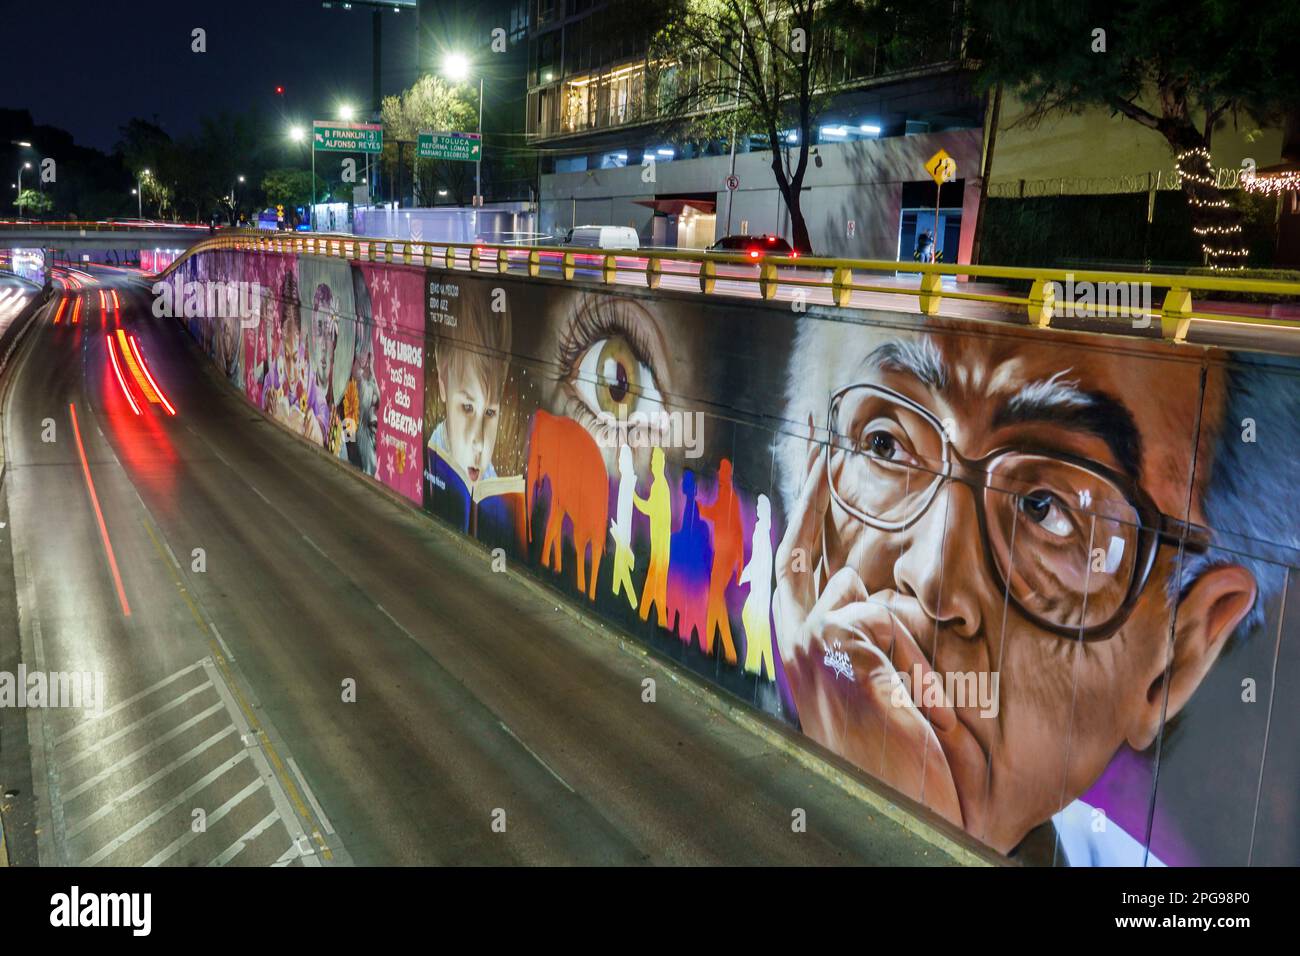 Mexico City,Circuito Interior Melchor Ocampo highway traffic mural murals by Lizette Charlotte,night nighttime vehicle light trails Stock Photo